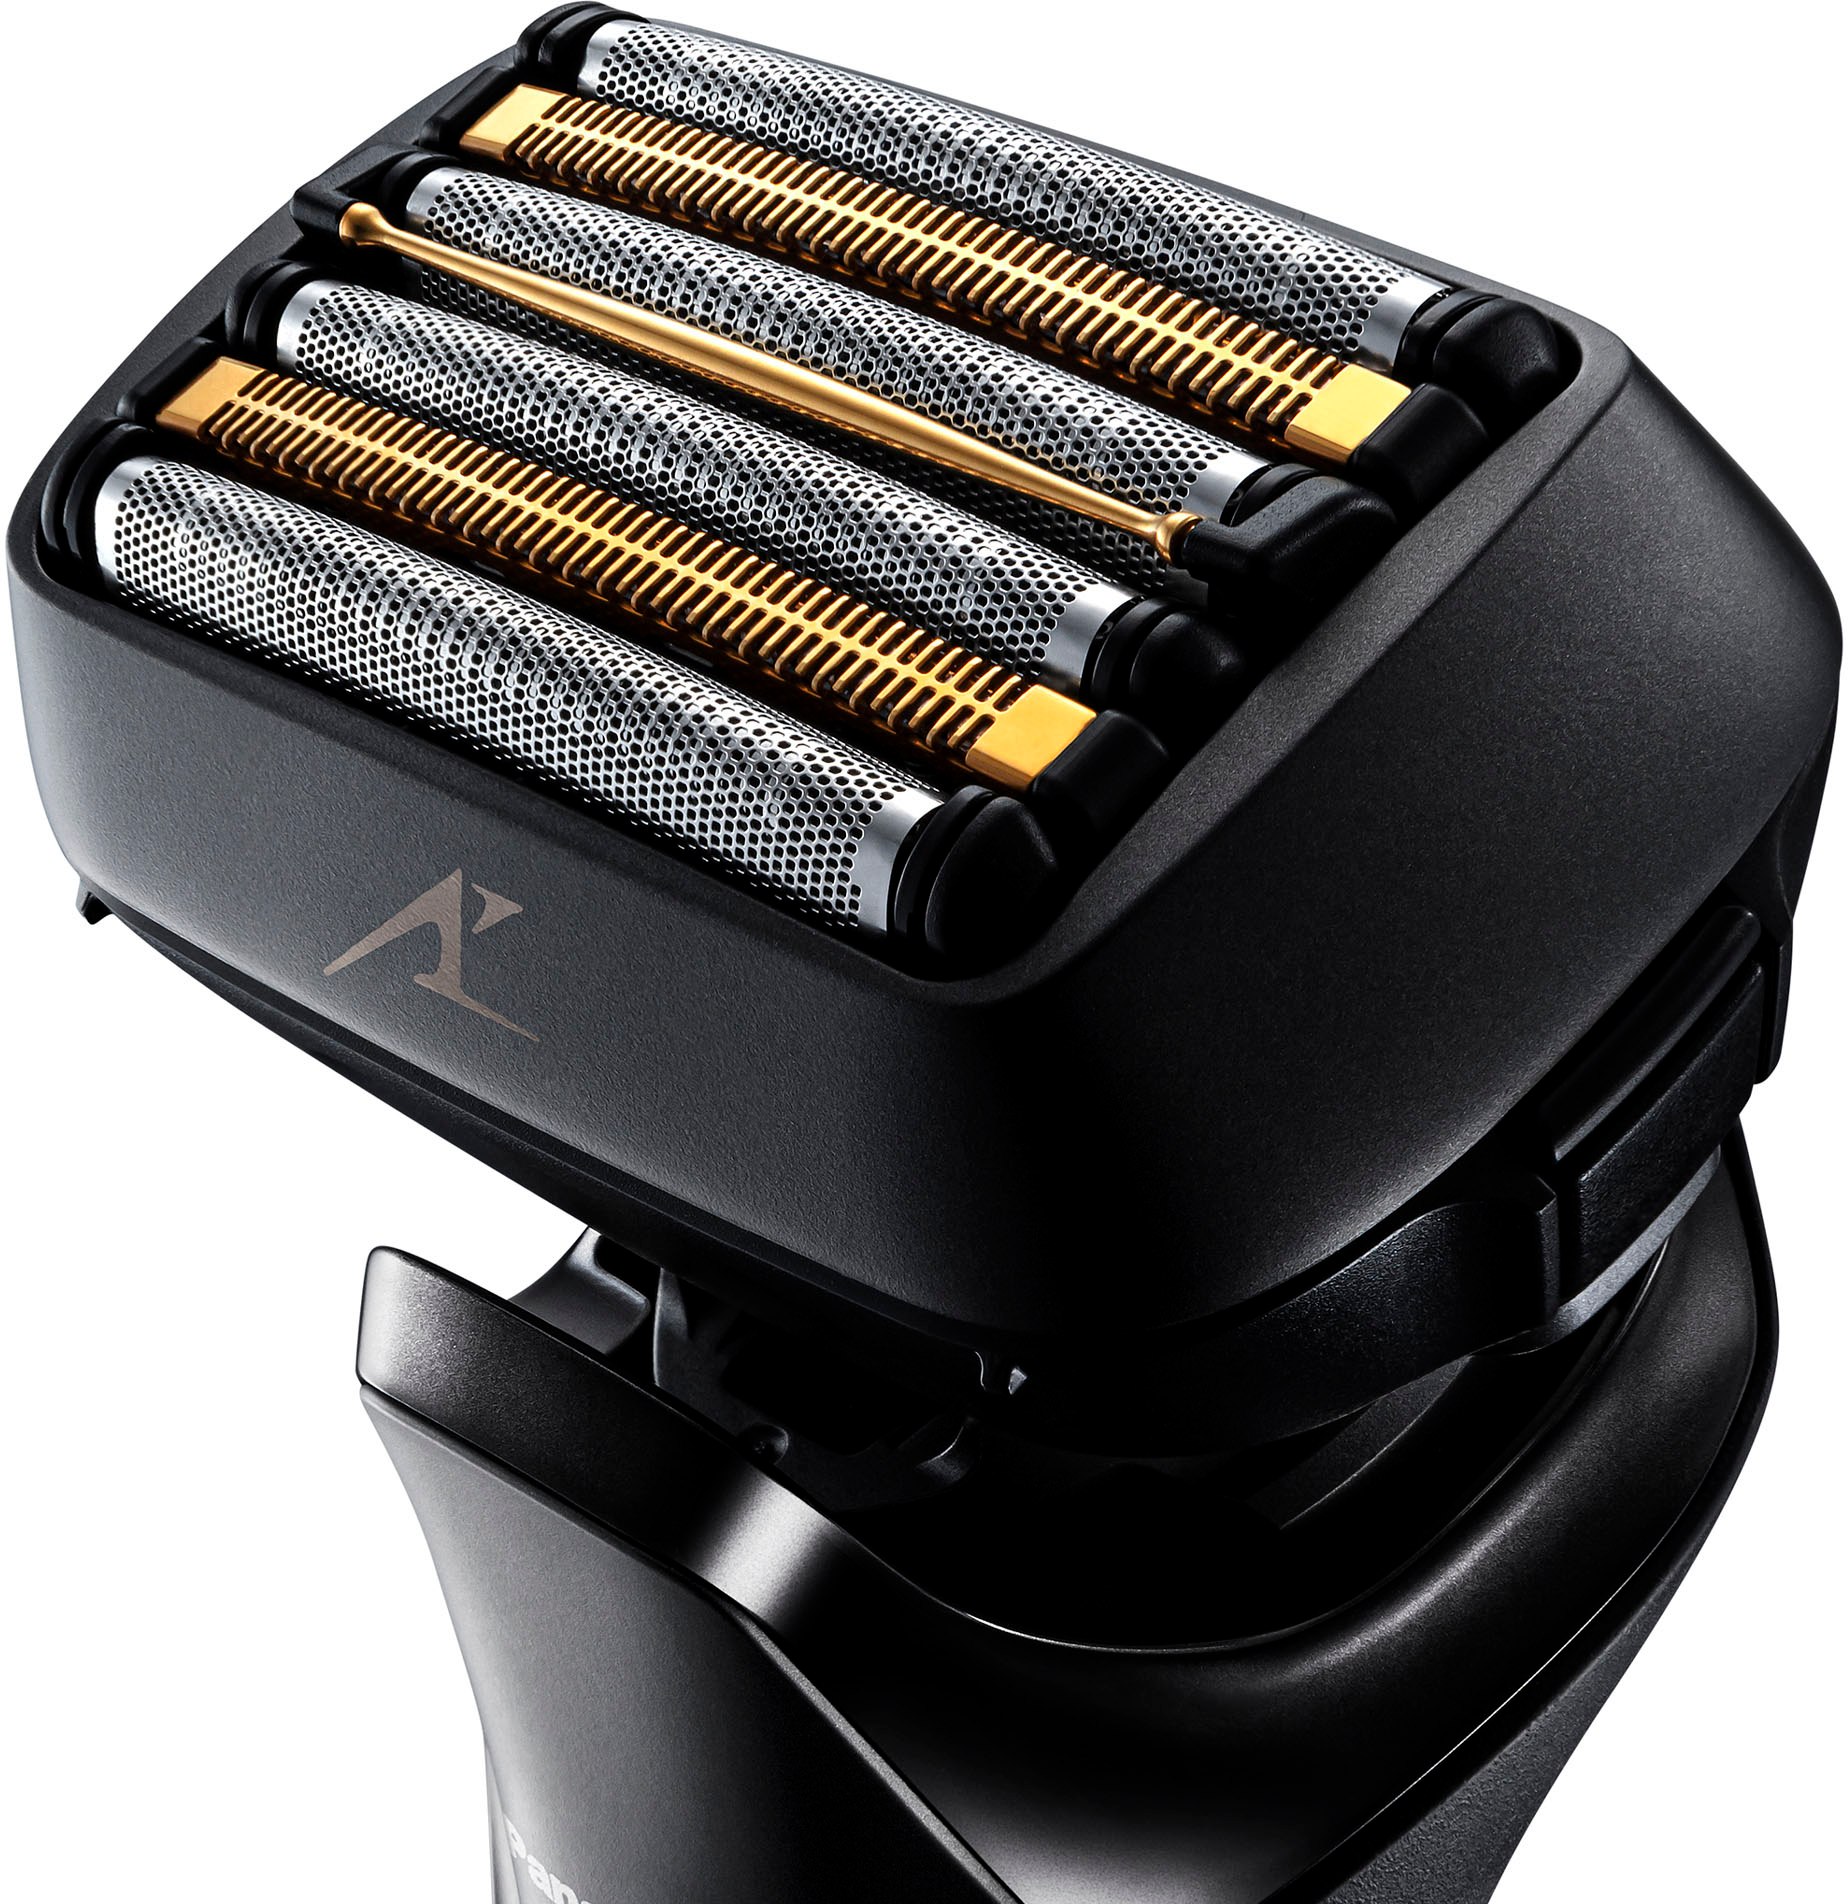 Panasonic Arc6 Six-Blade Wet/Dry Electric Shaver with Automatic 